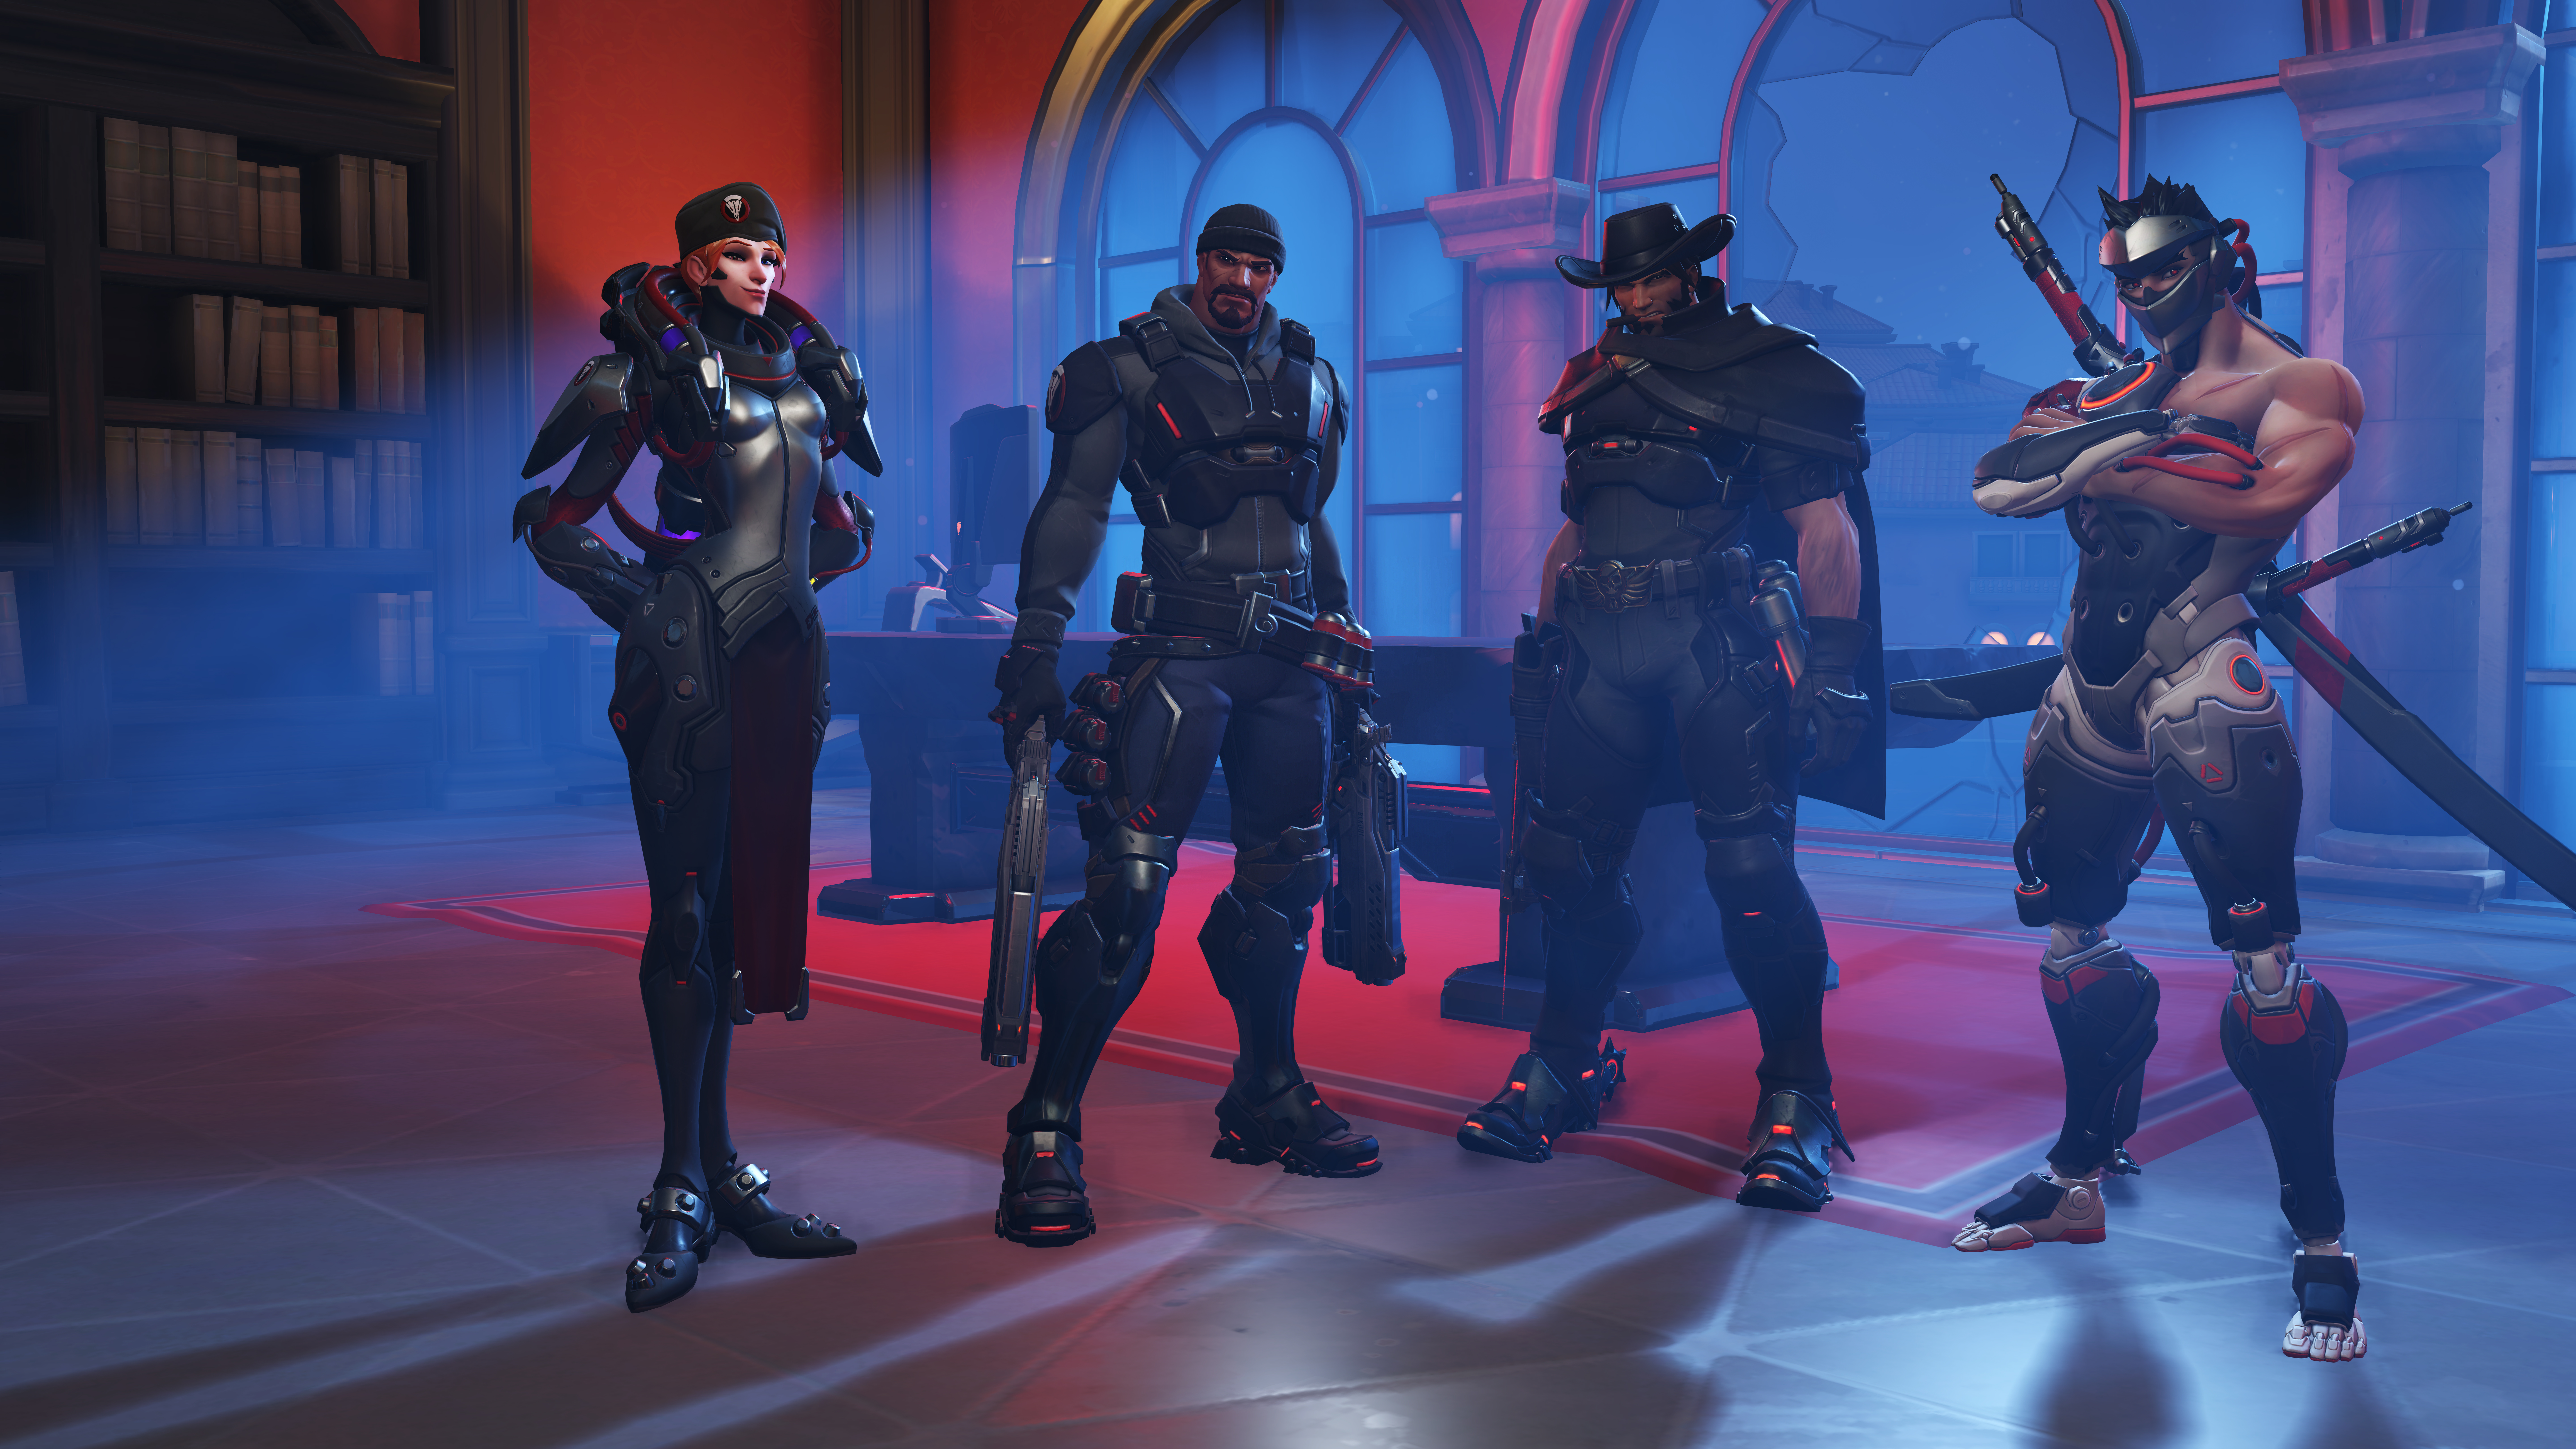 General 11520x6480 Overwatch Blackwatch Moira(Overwatch) Reaper (Overwatch) McCree (Overwatch) Genji (Overwatch) video game characters